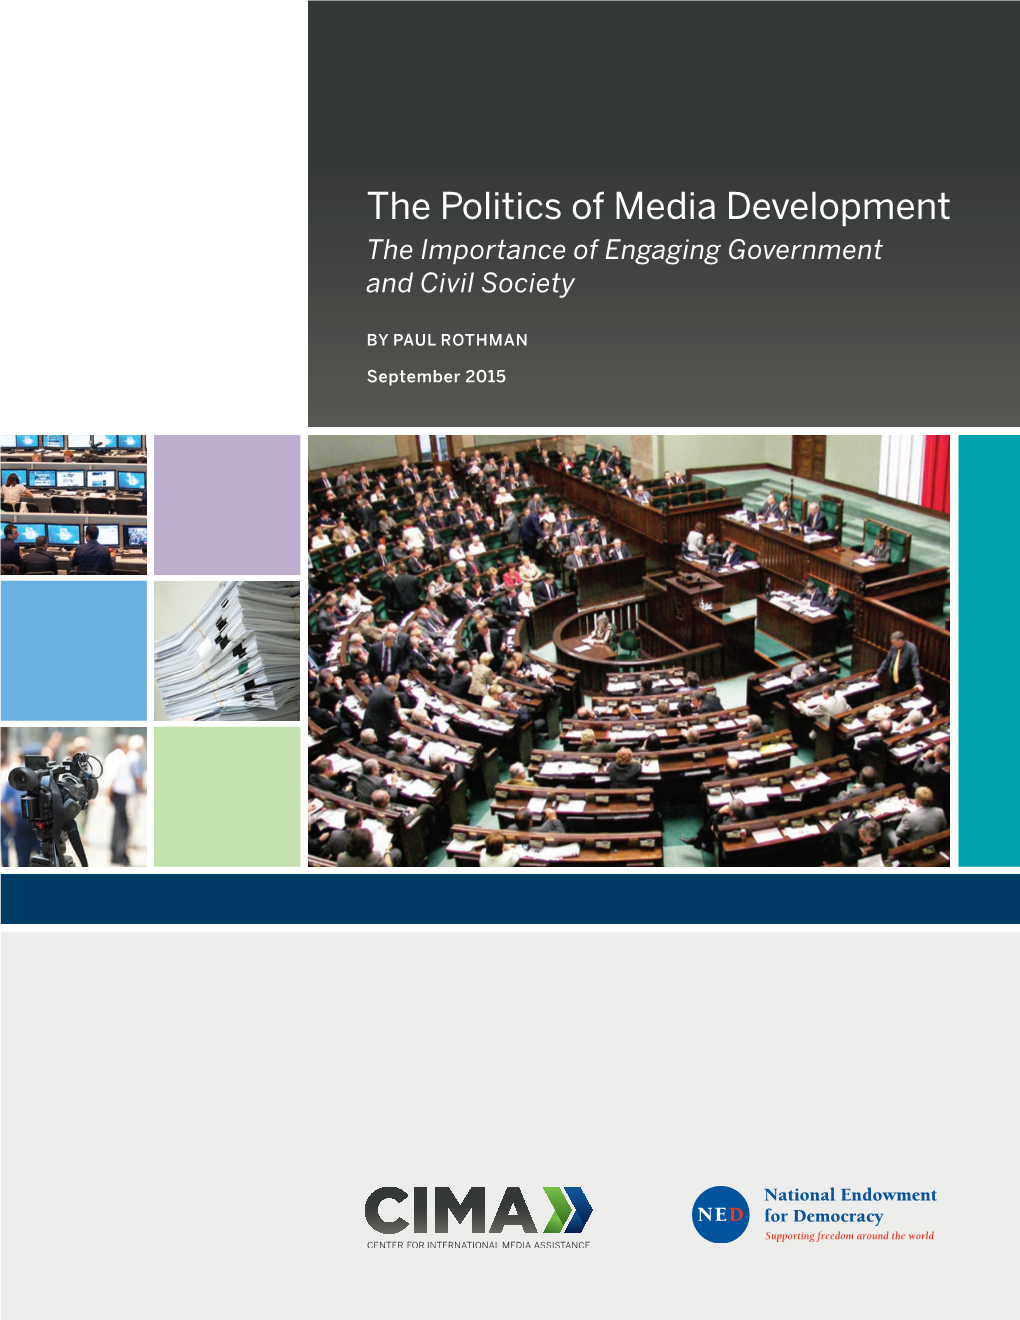 The Politics of Media Development the Importance of Engaging Government and Civil Society